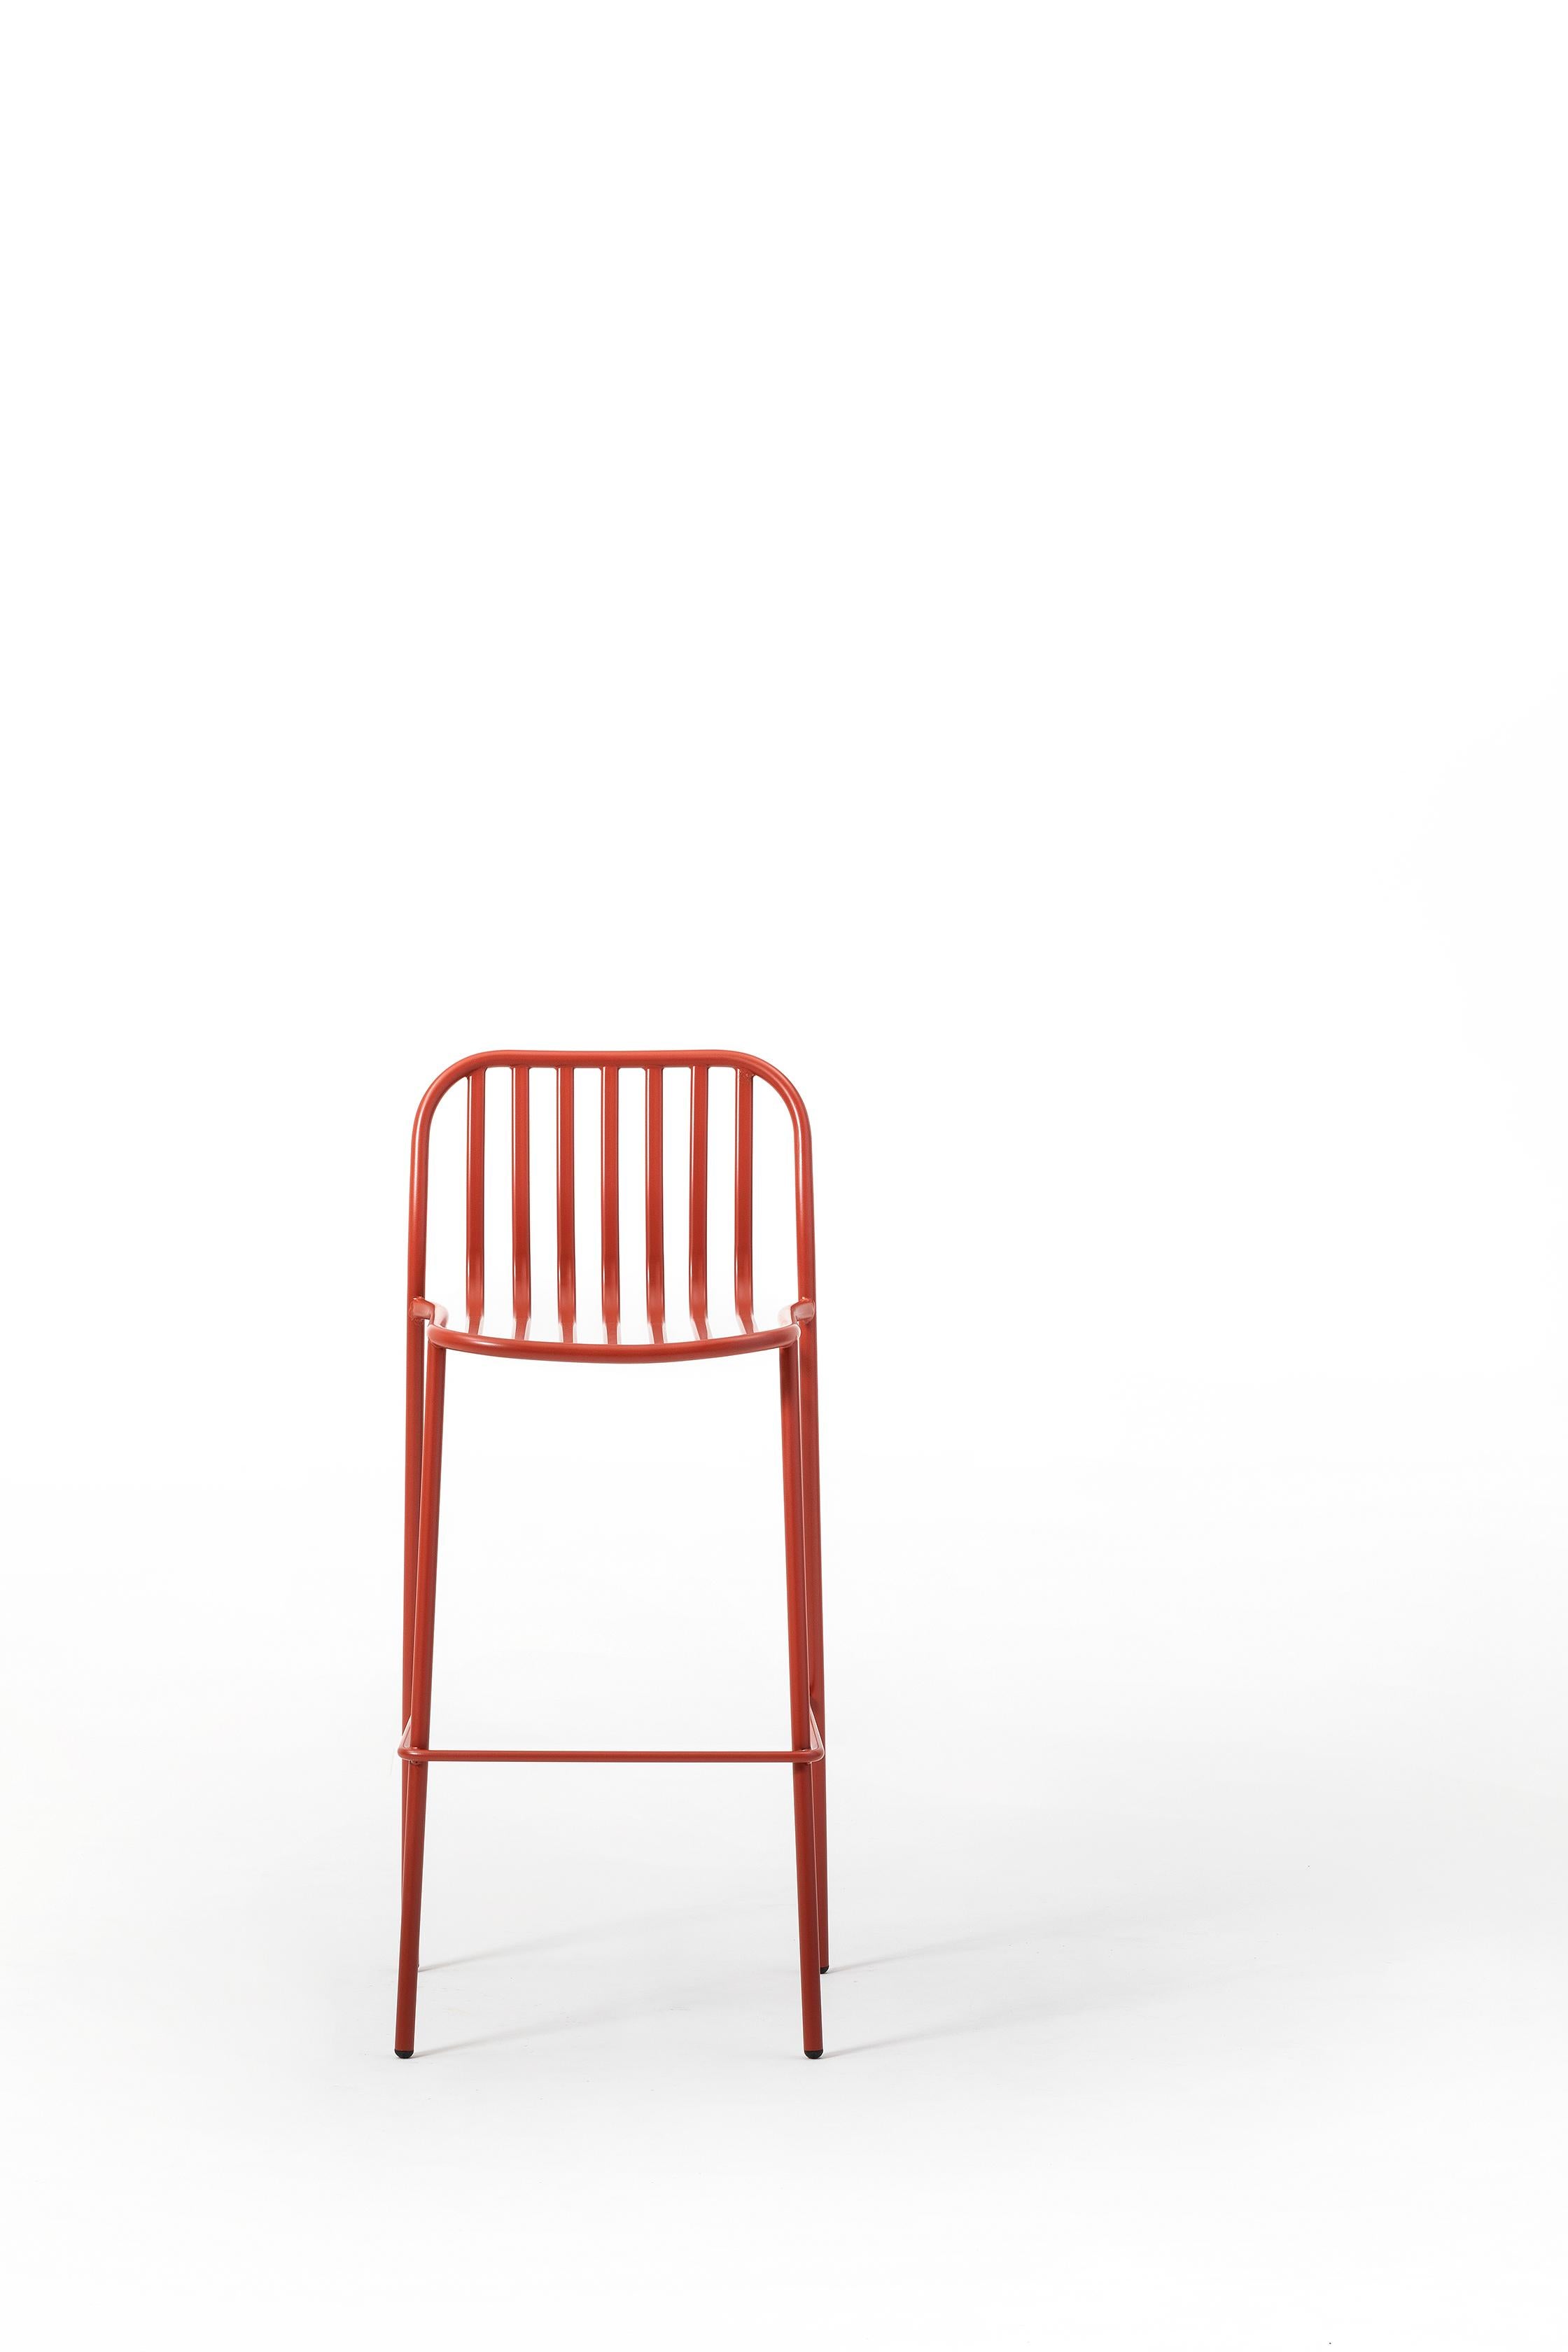 A collection Metis Line made entirely of metal, with minimalist design and maximum functionality. The backrest and seat of Metis Line feature a wire design with vertical ovals, which sinuously and harmoniously accompany the outline of the frame,